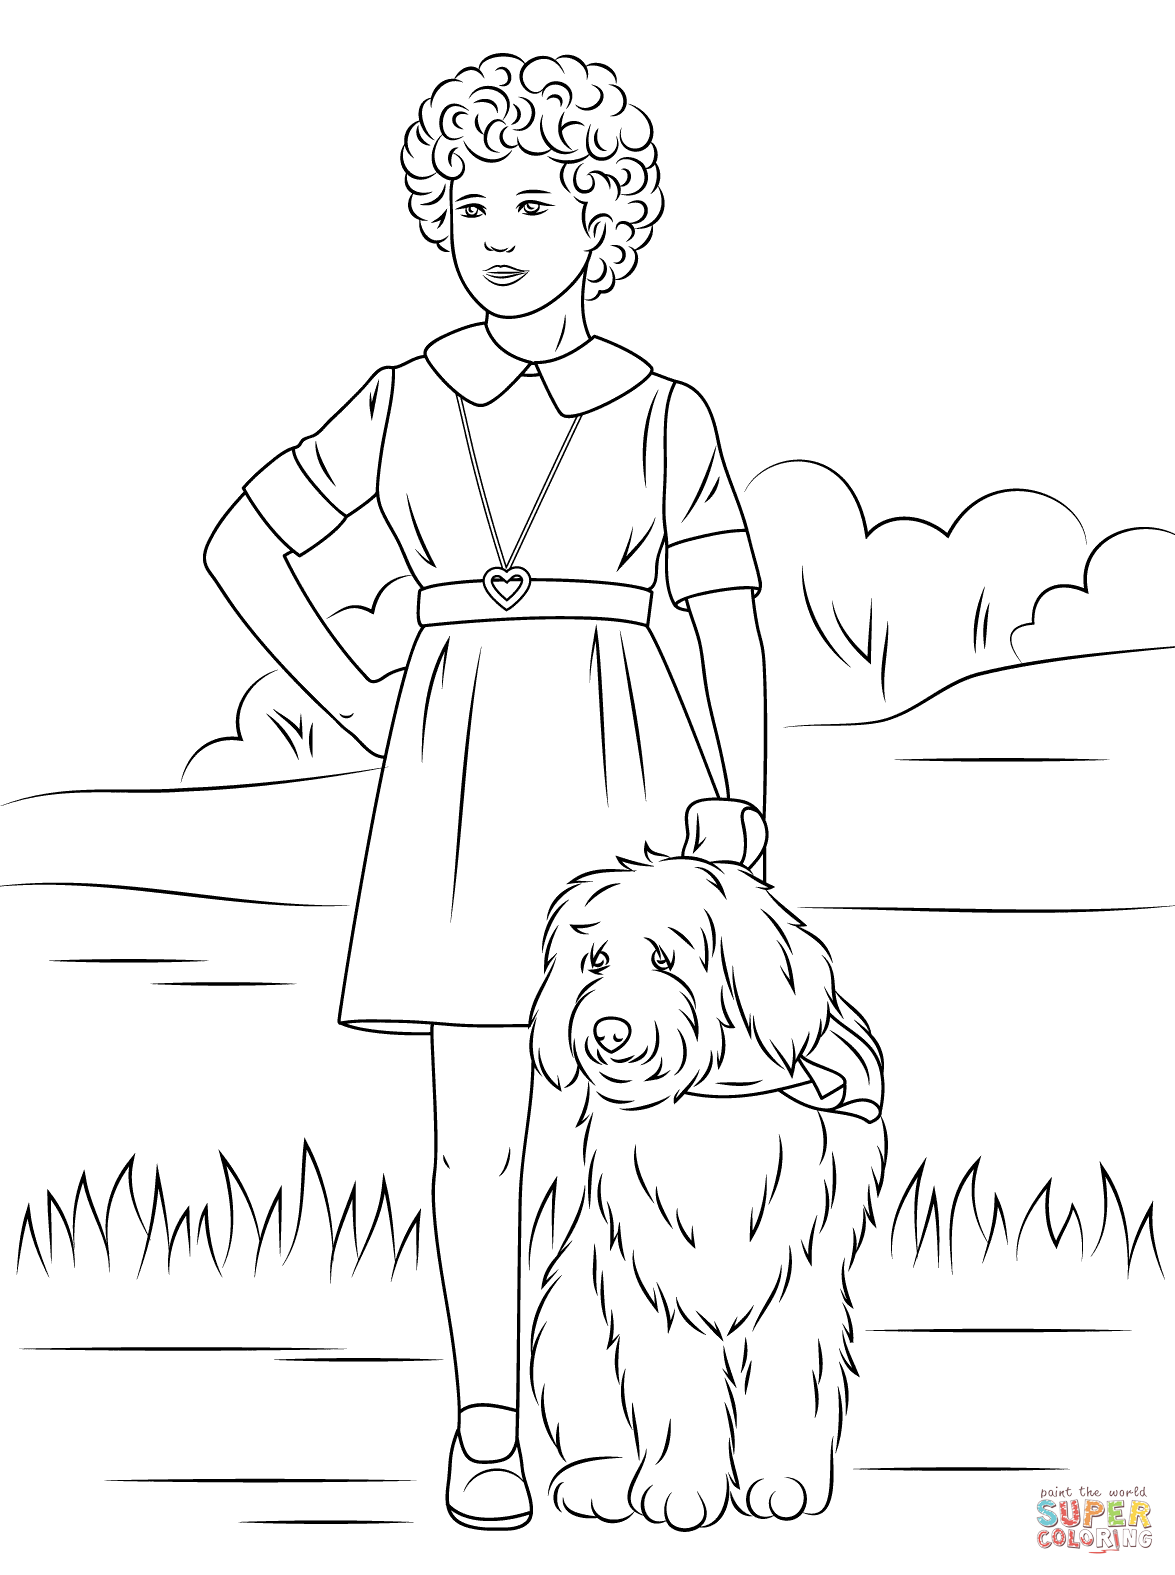 Orphan Annie - Coloring Pages for Kids and for Adults